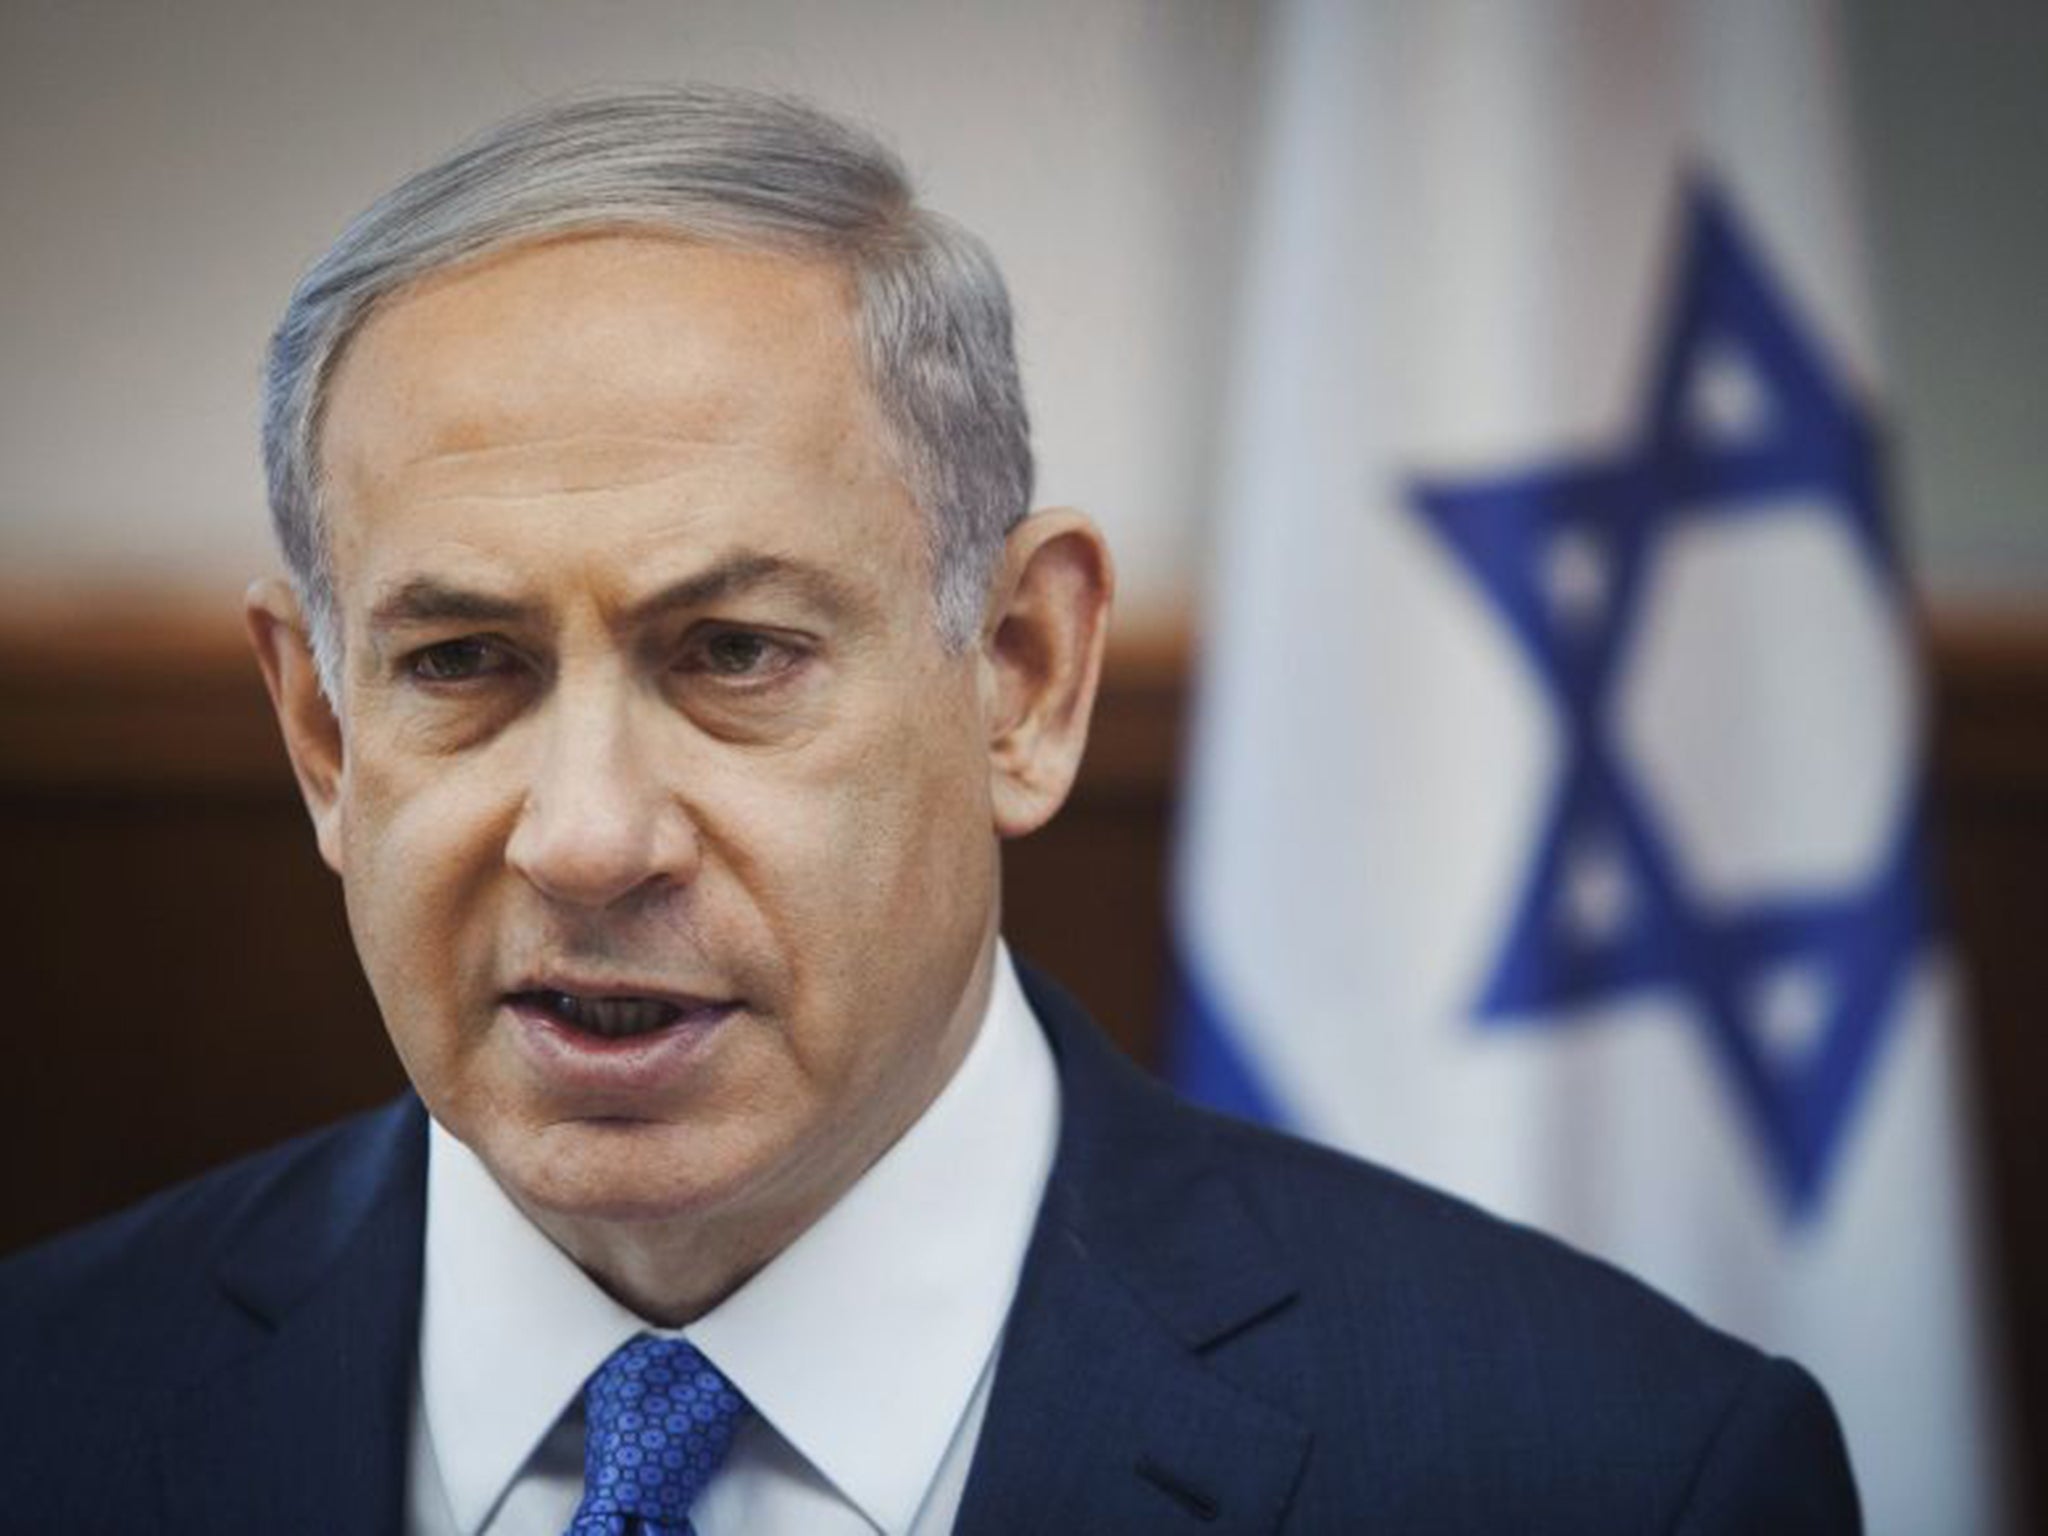 Benjamin Netanyahu has formed a right-wing coalition government